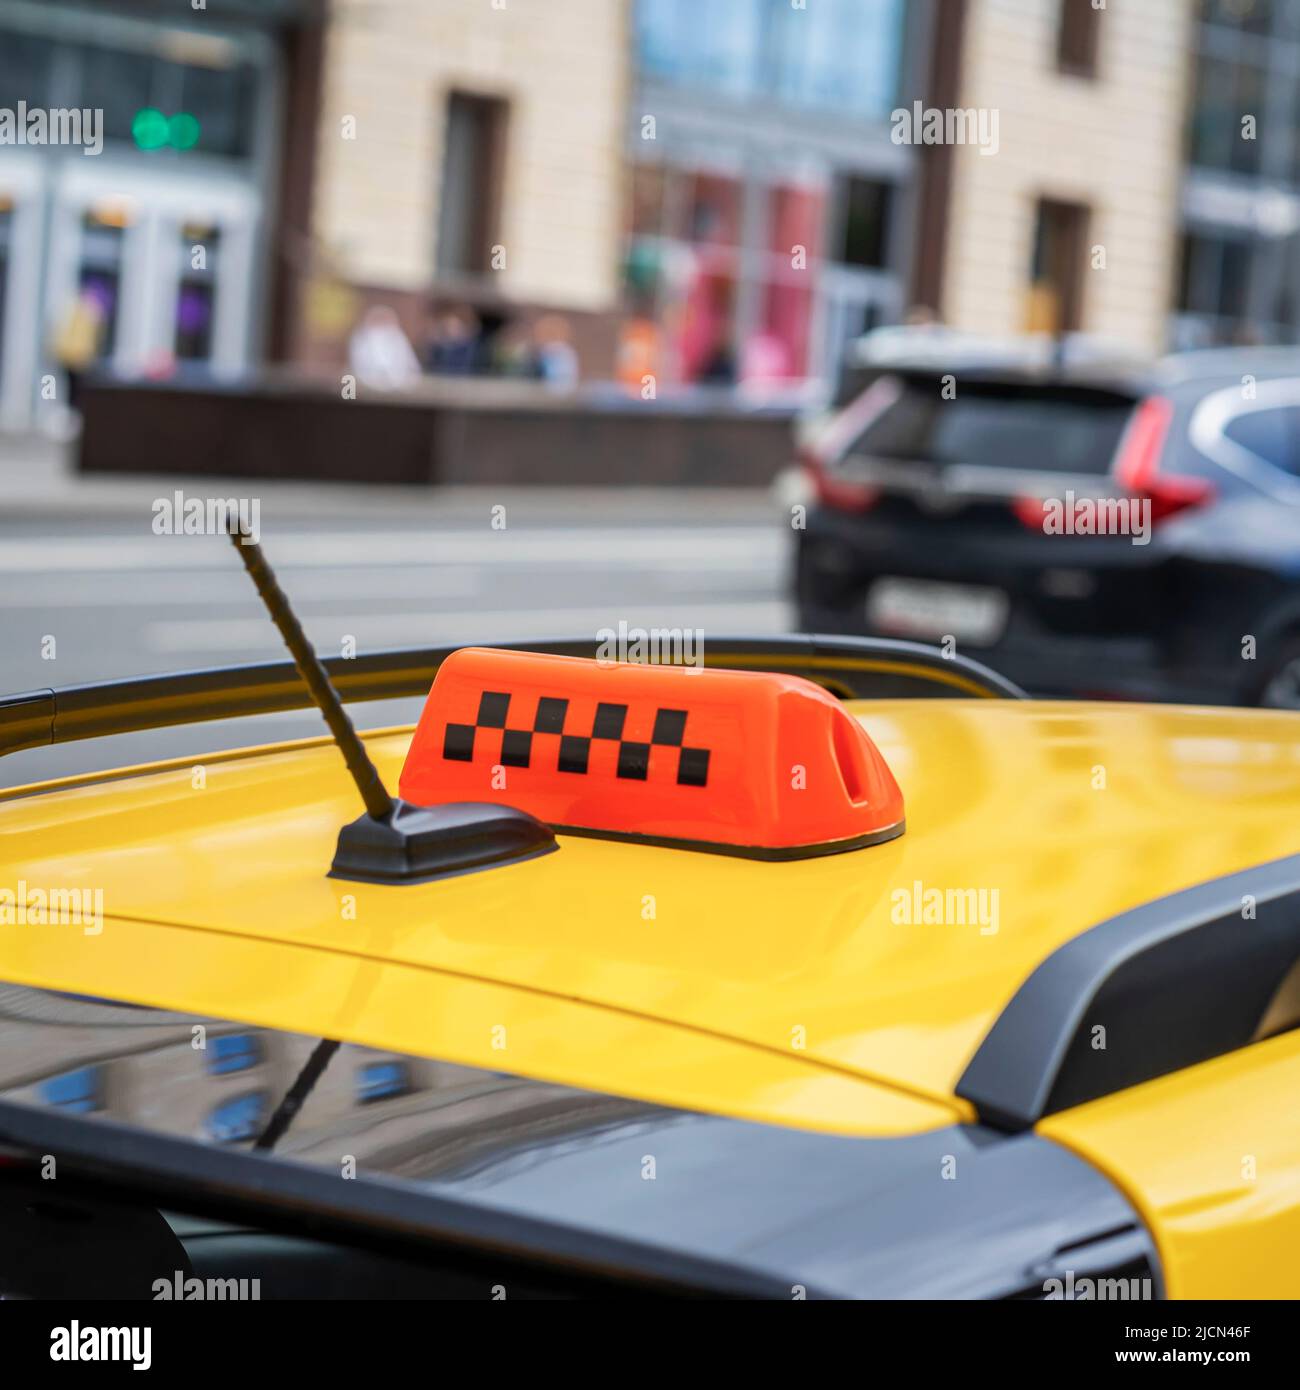 Yellow taxi car roof sign close-up, blurred abstract city street background, selective focus Stock Photo